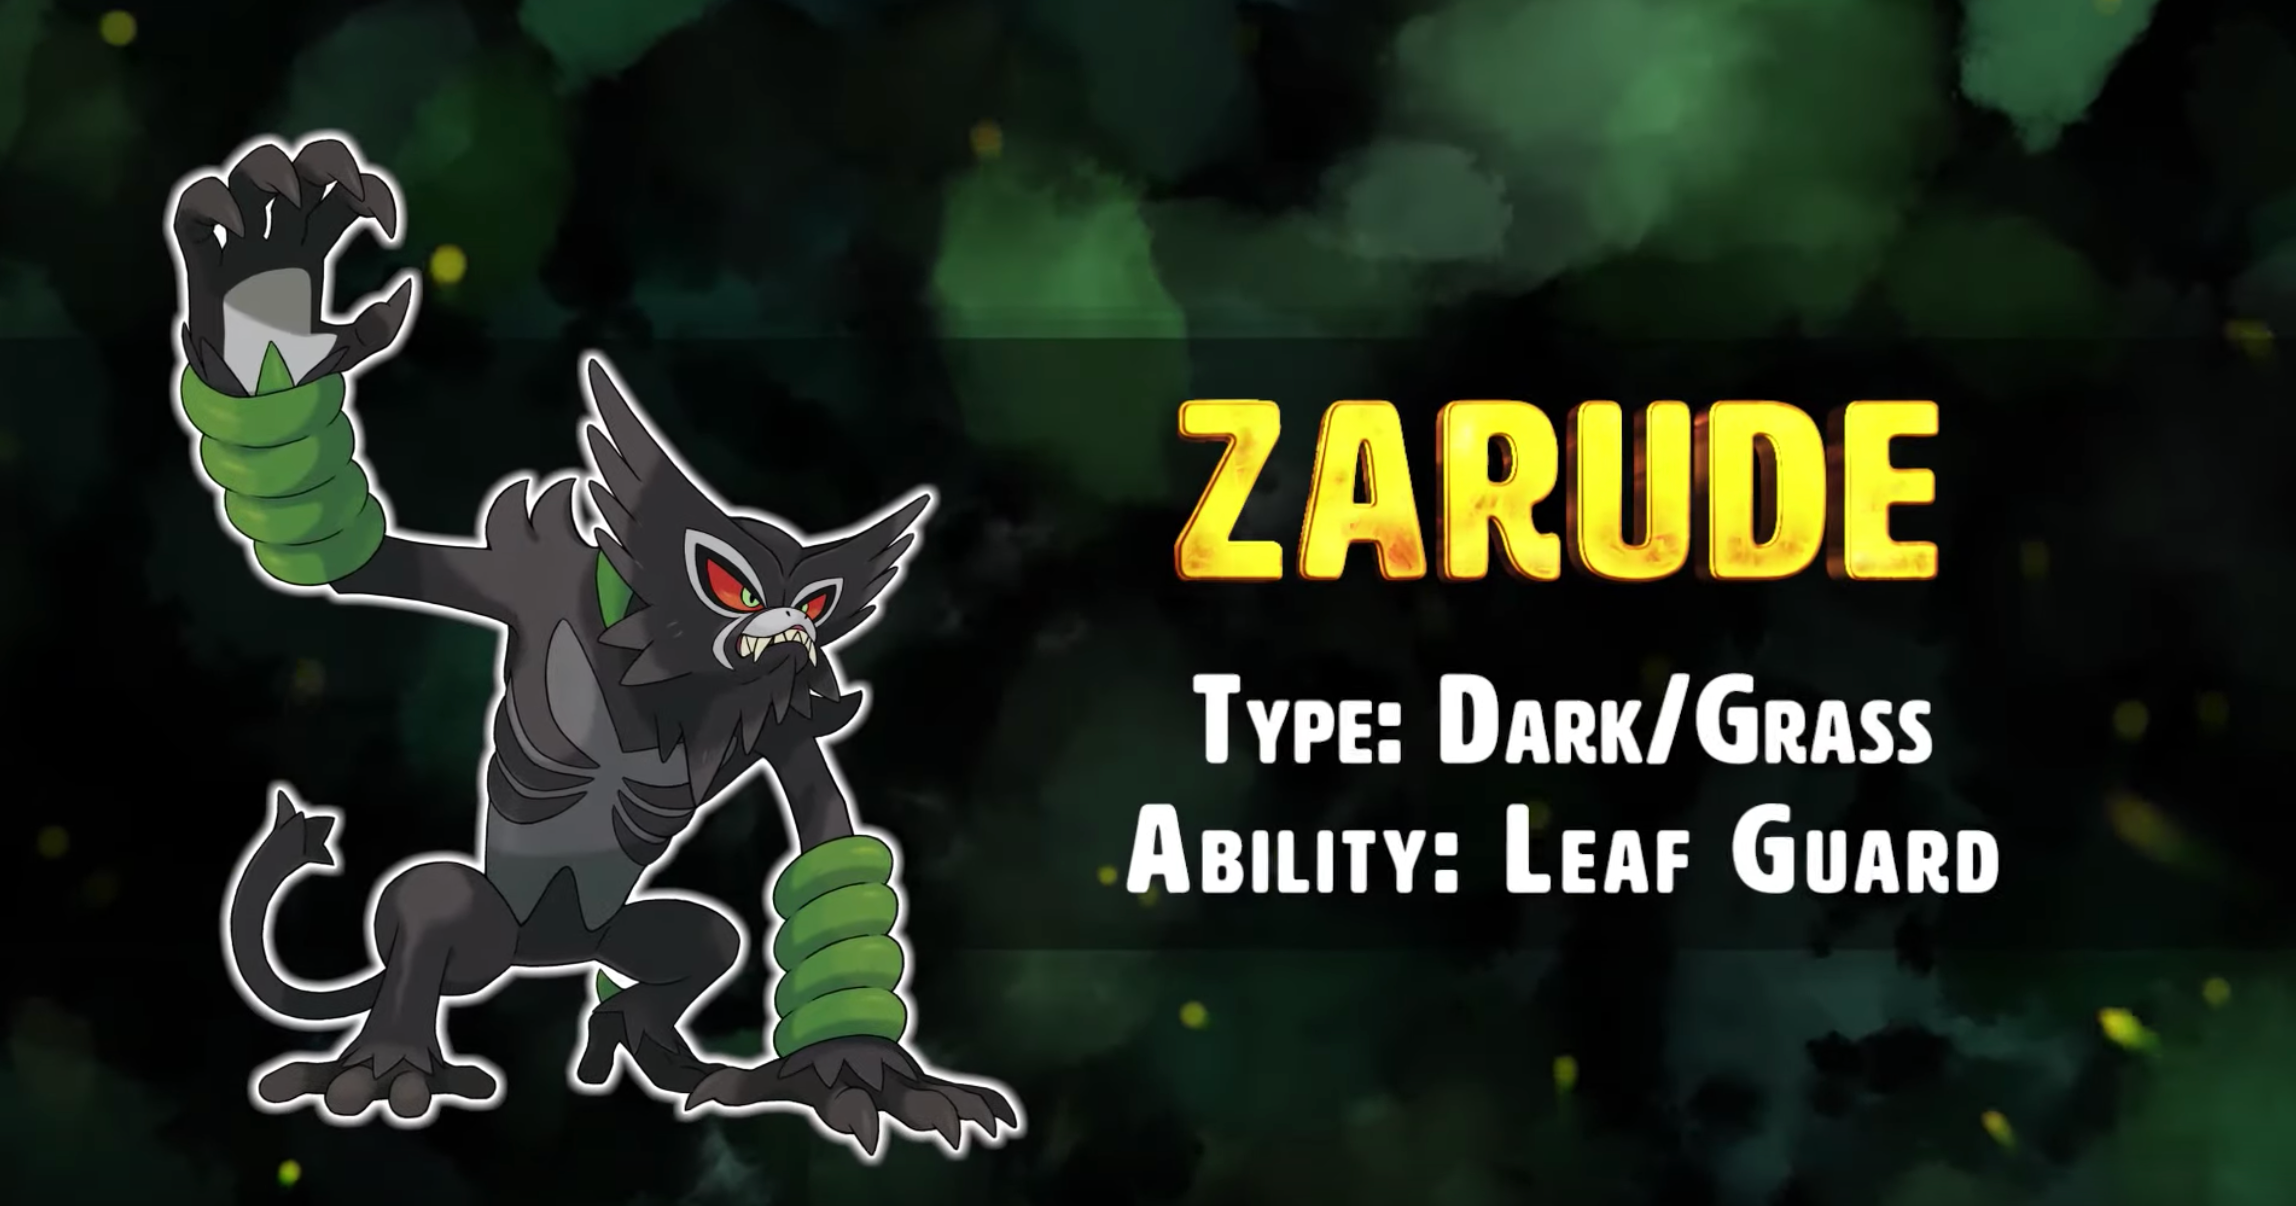 New Images of the Mythical Pokemon Zarude Have Surfaced - Siliconera